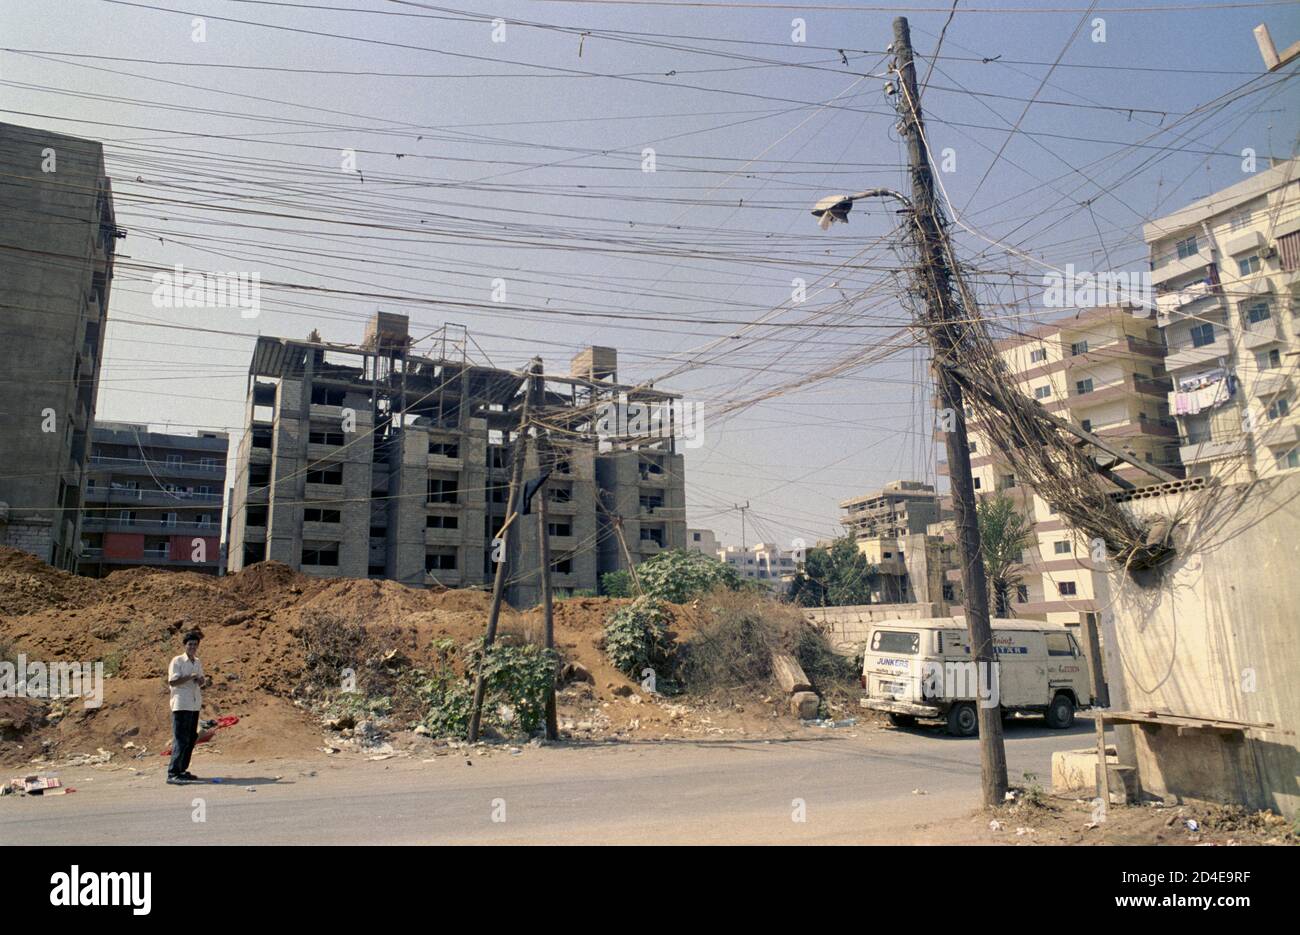 18th September 1993 A confused entanglement of wires carrying mains electricity in a southern Beirut. Stock Photo